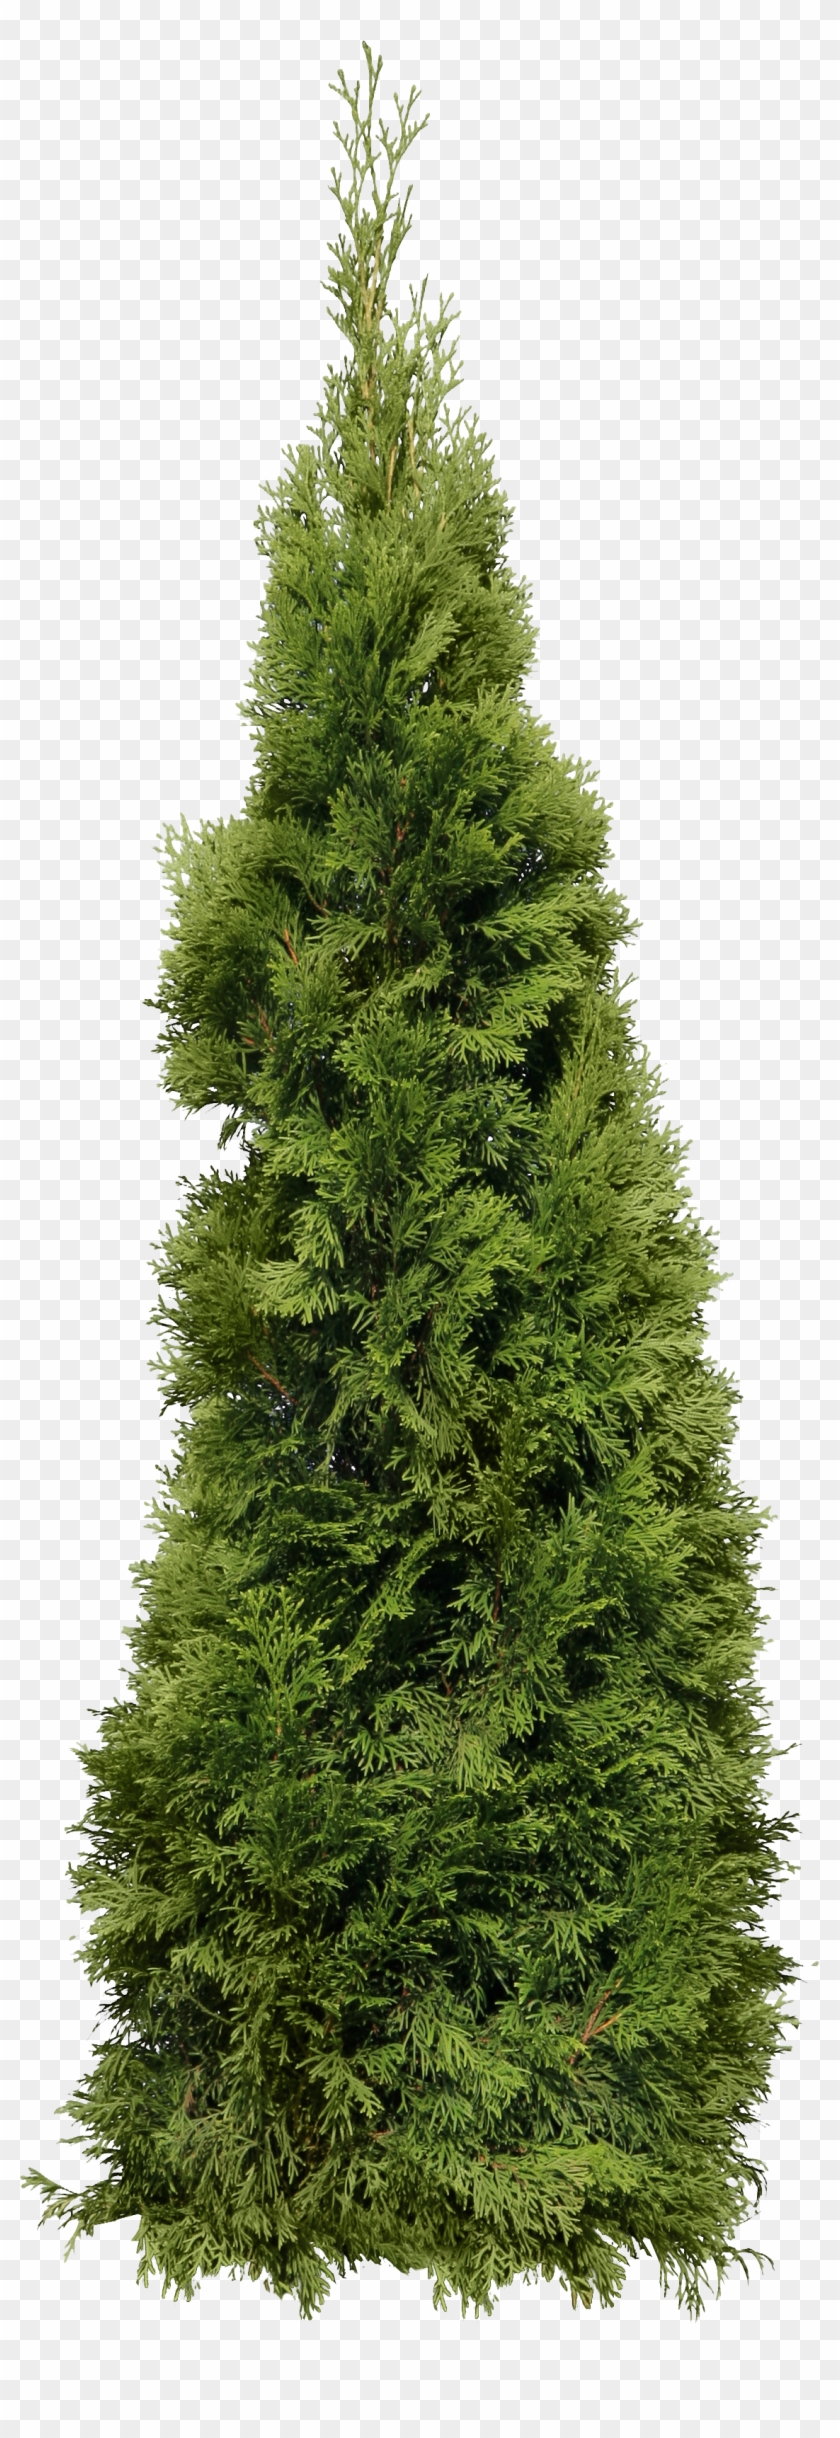 Green Big Fir-tree Png Image - Cypress Tree Transparent Background Clipart #1373425